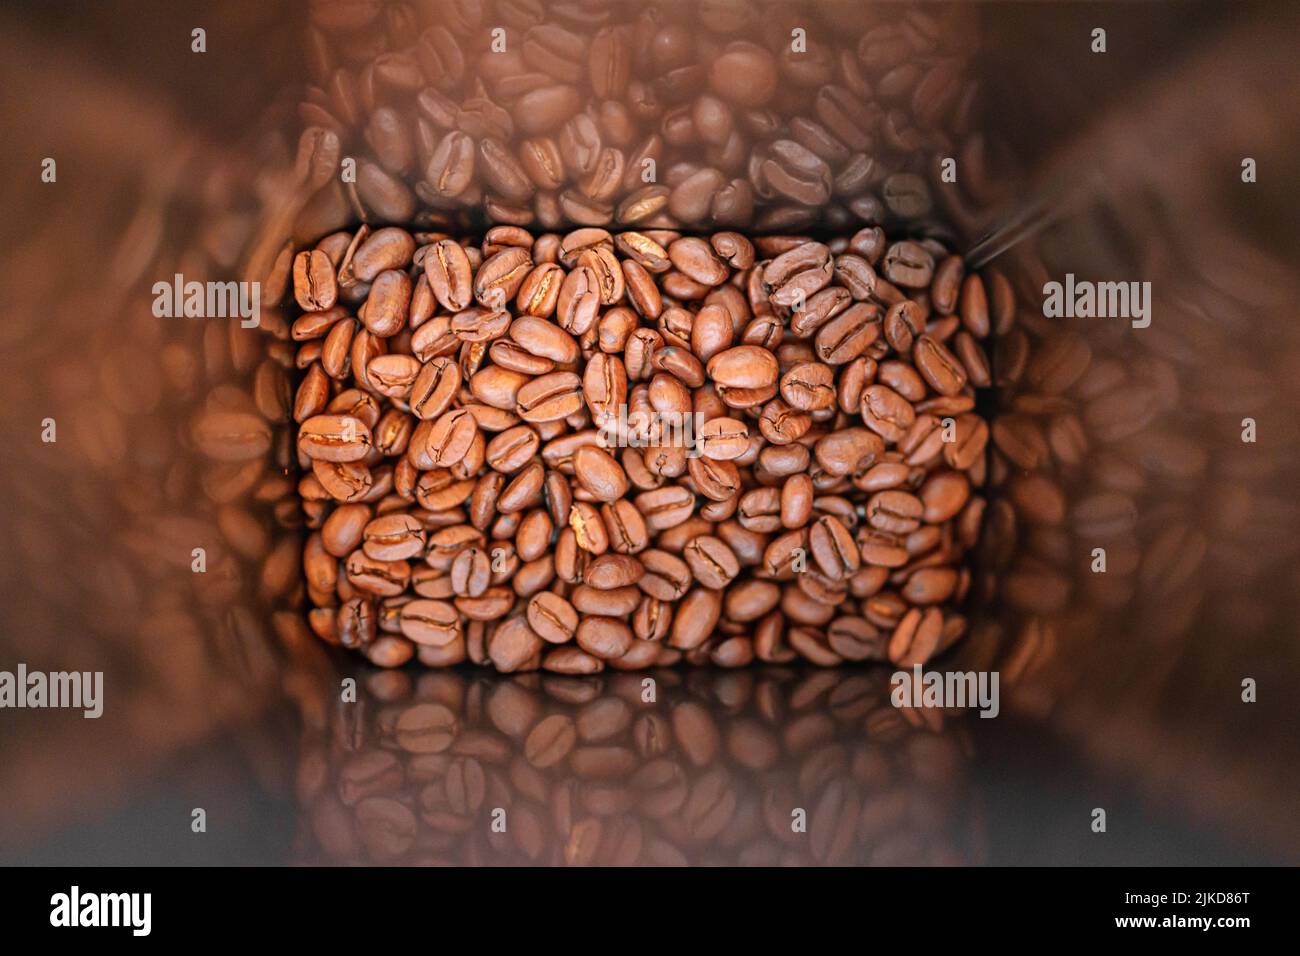 Kaffee in der Dose / Coffee in the can Stock Photo